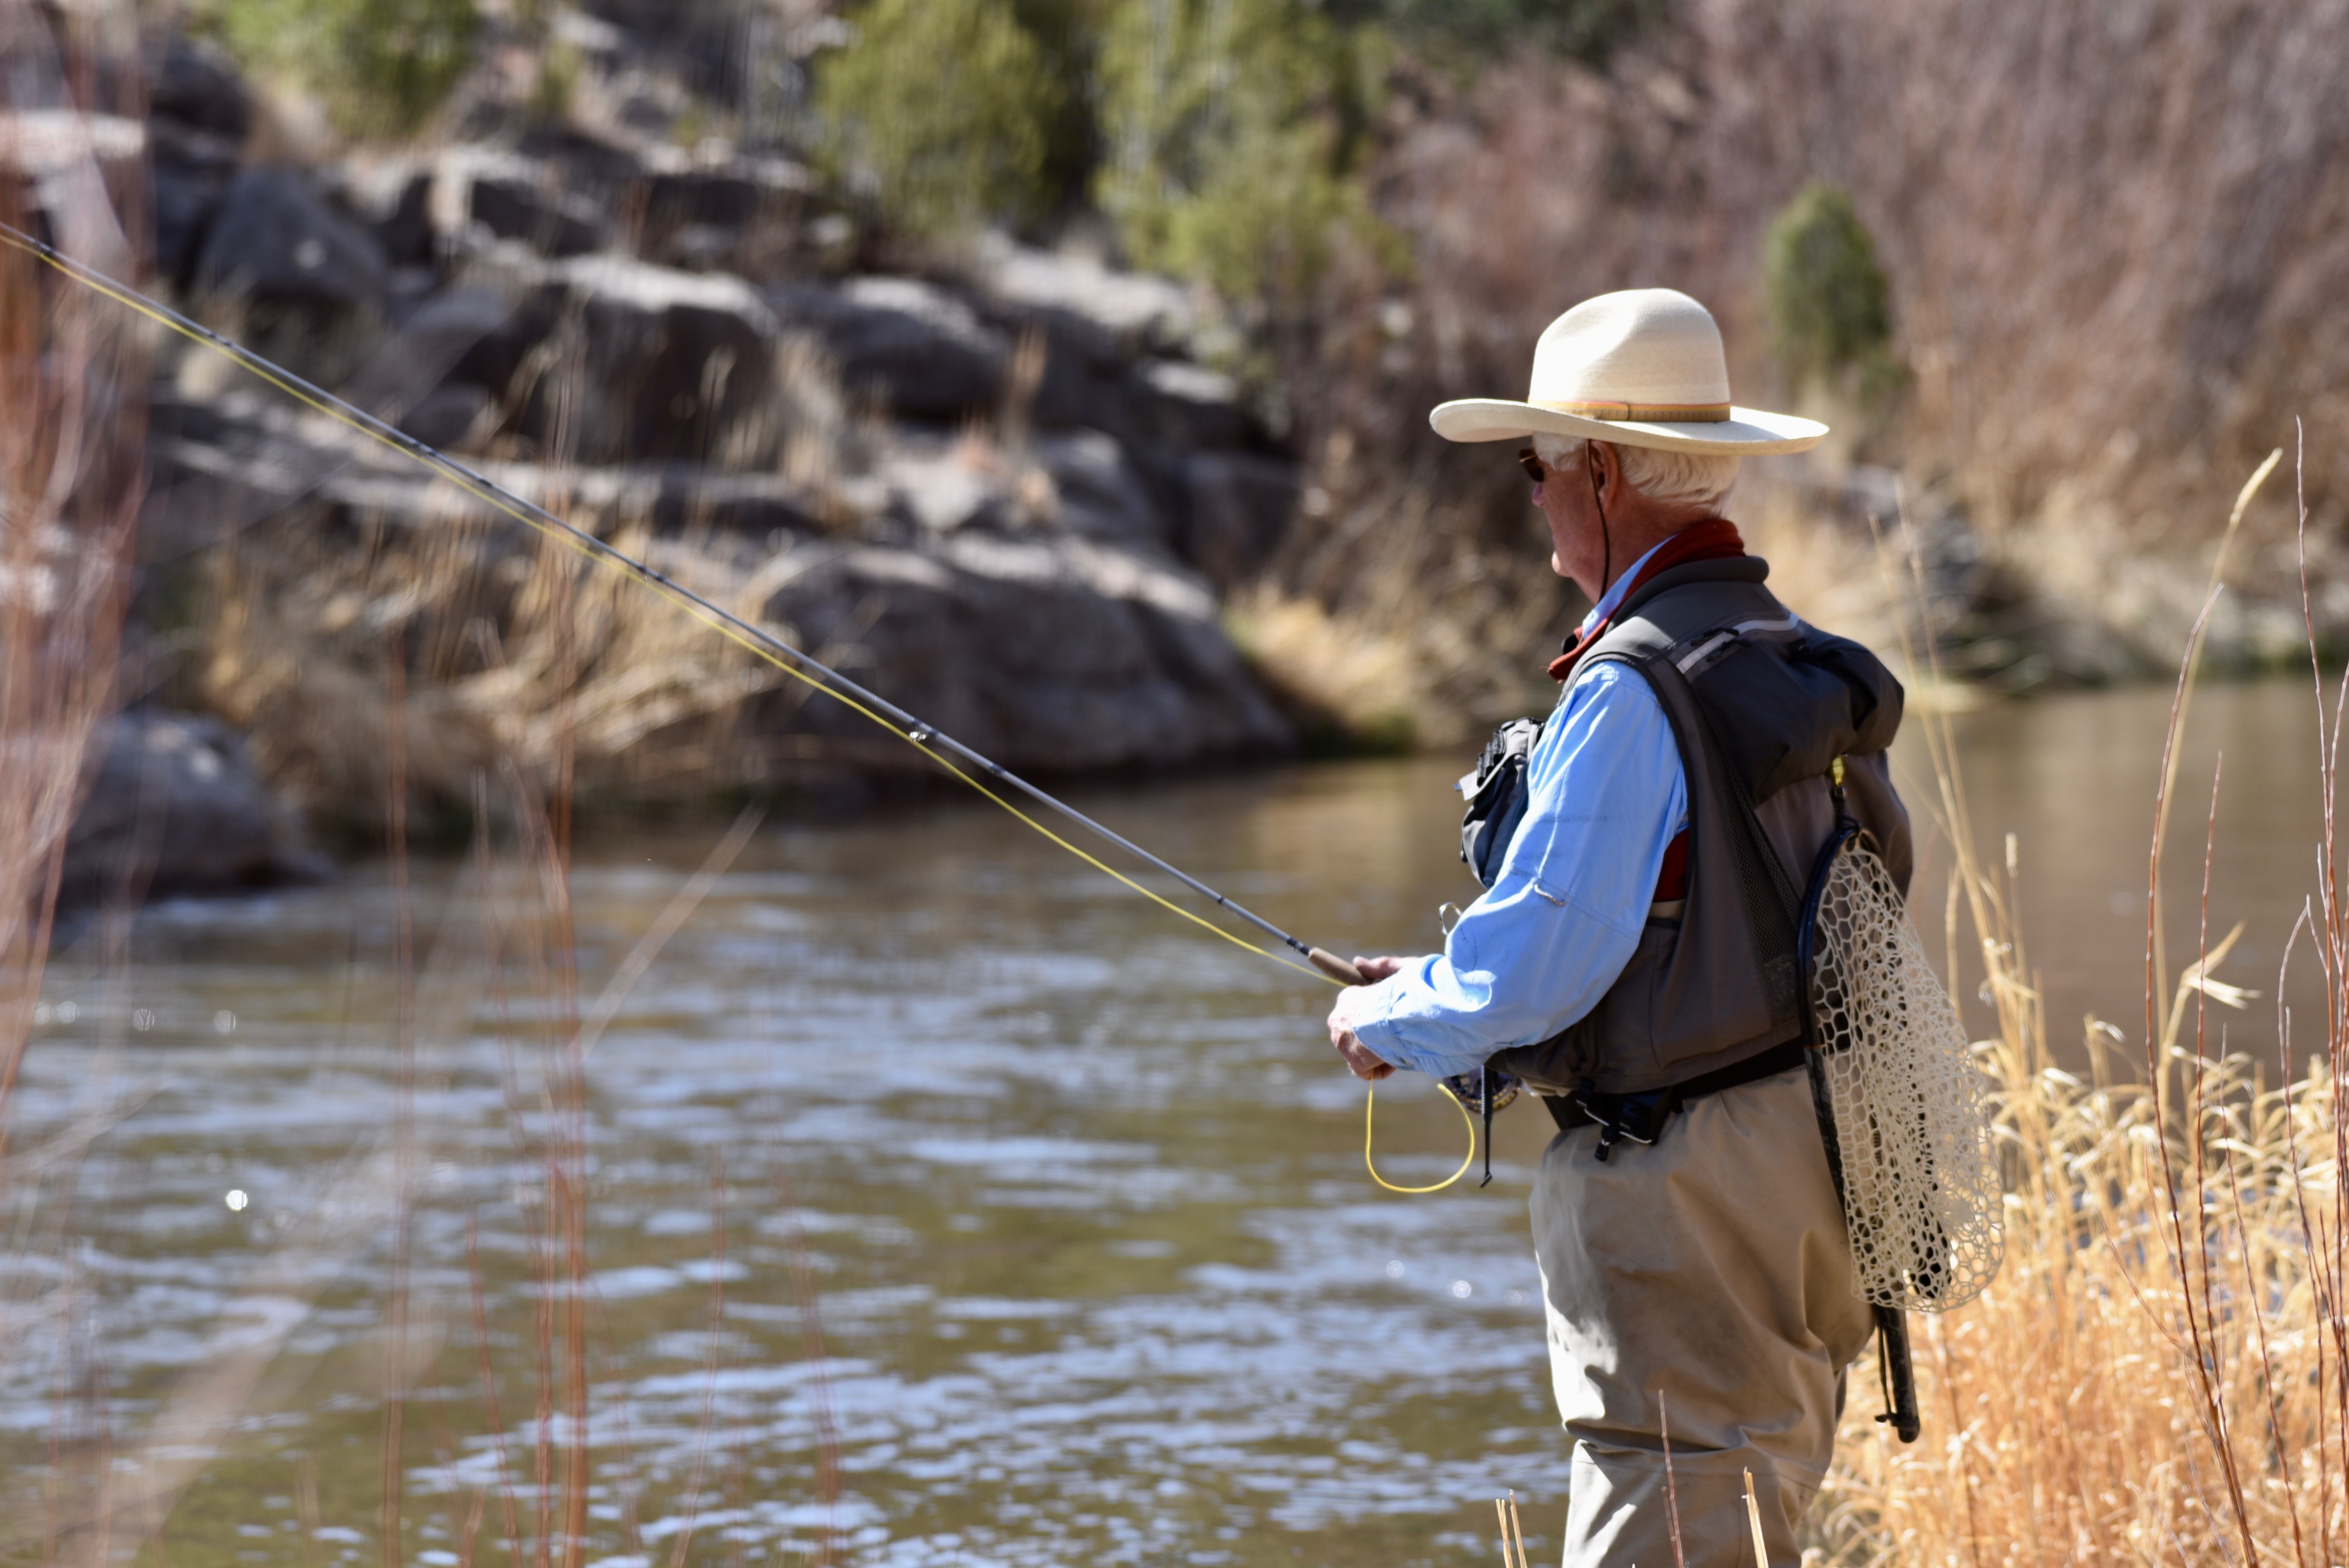 August 2021 Fall Fishing - Pecos National Historical Park (U.S. National Park Service)